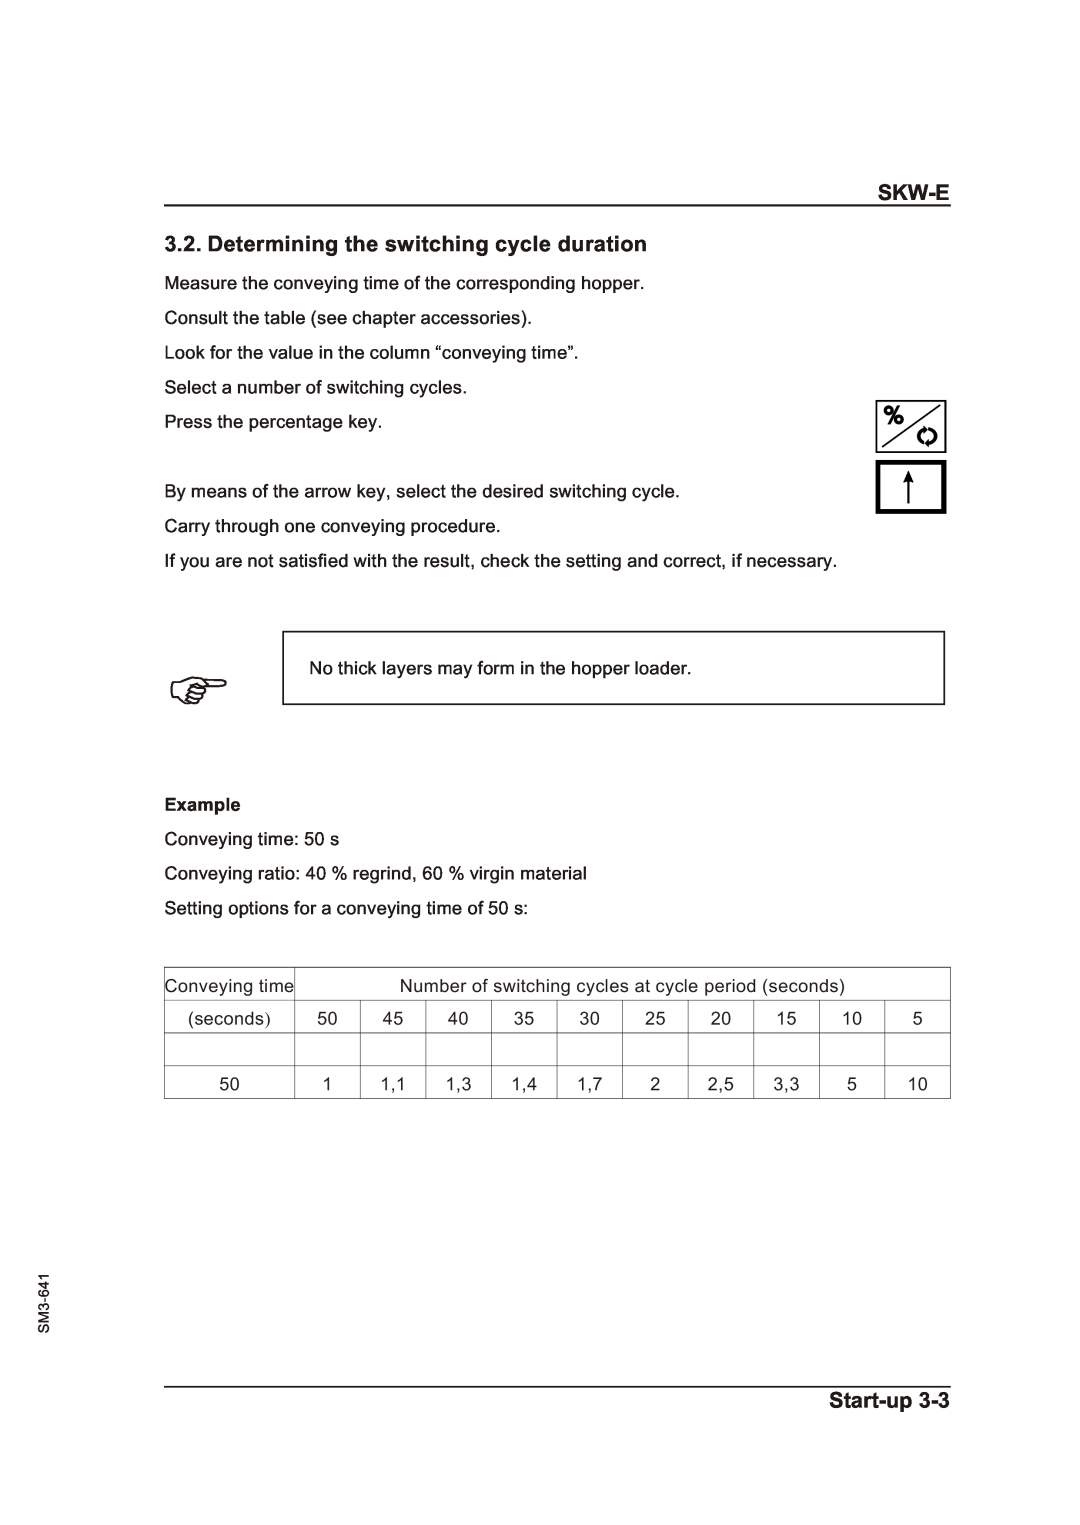 Sterling Plumbing SKW-E manual Determining the switching cycle duration, Skw-E, Start-up 